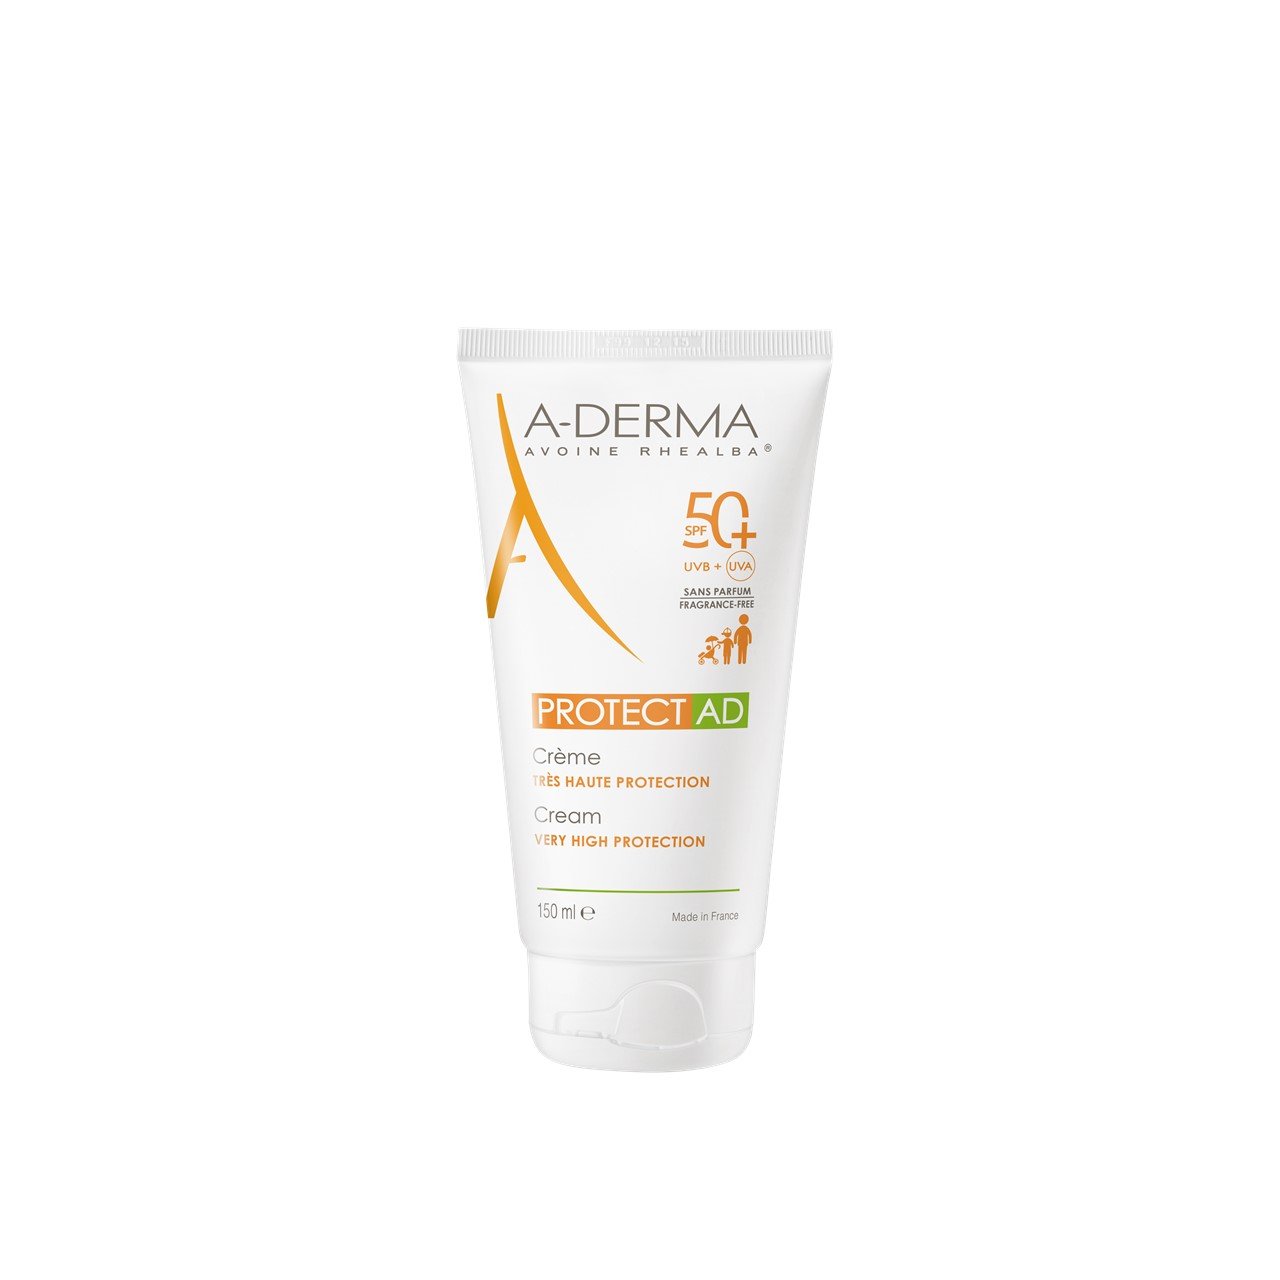 A-Derma Protect AD Very High Protection Cream SPF50+ 150ml